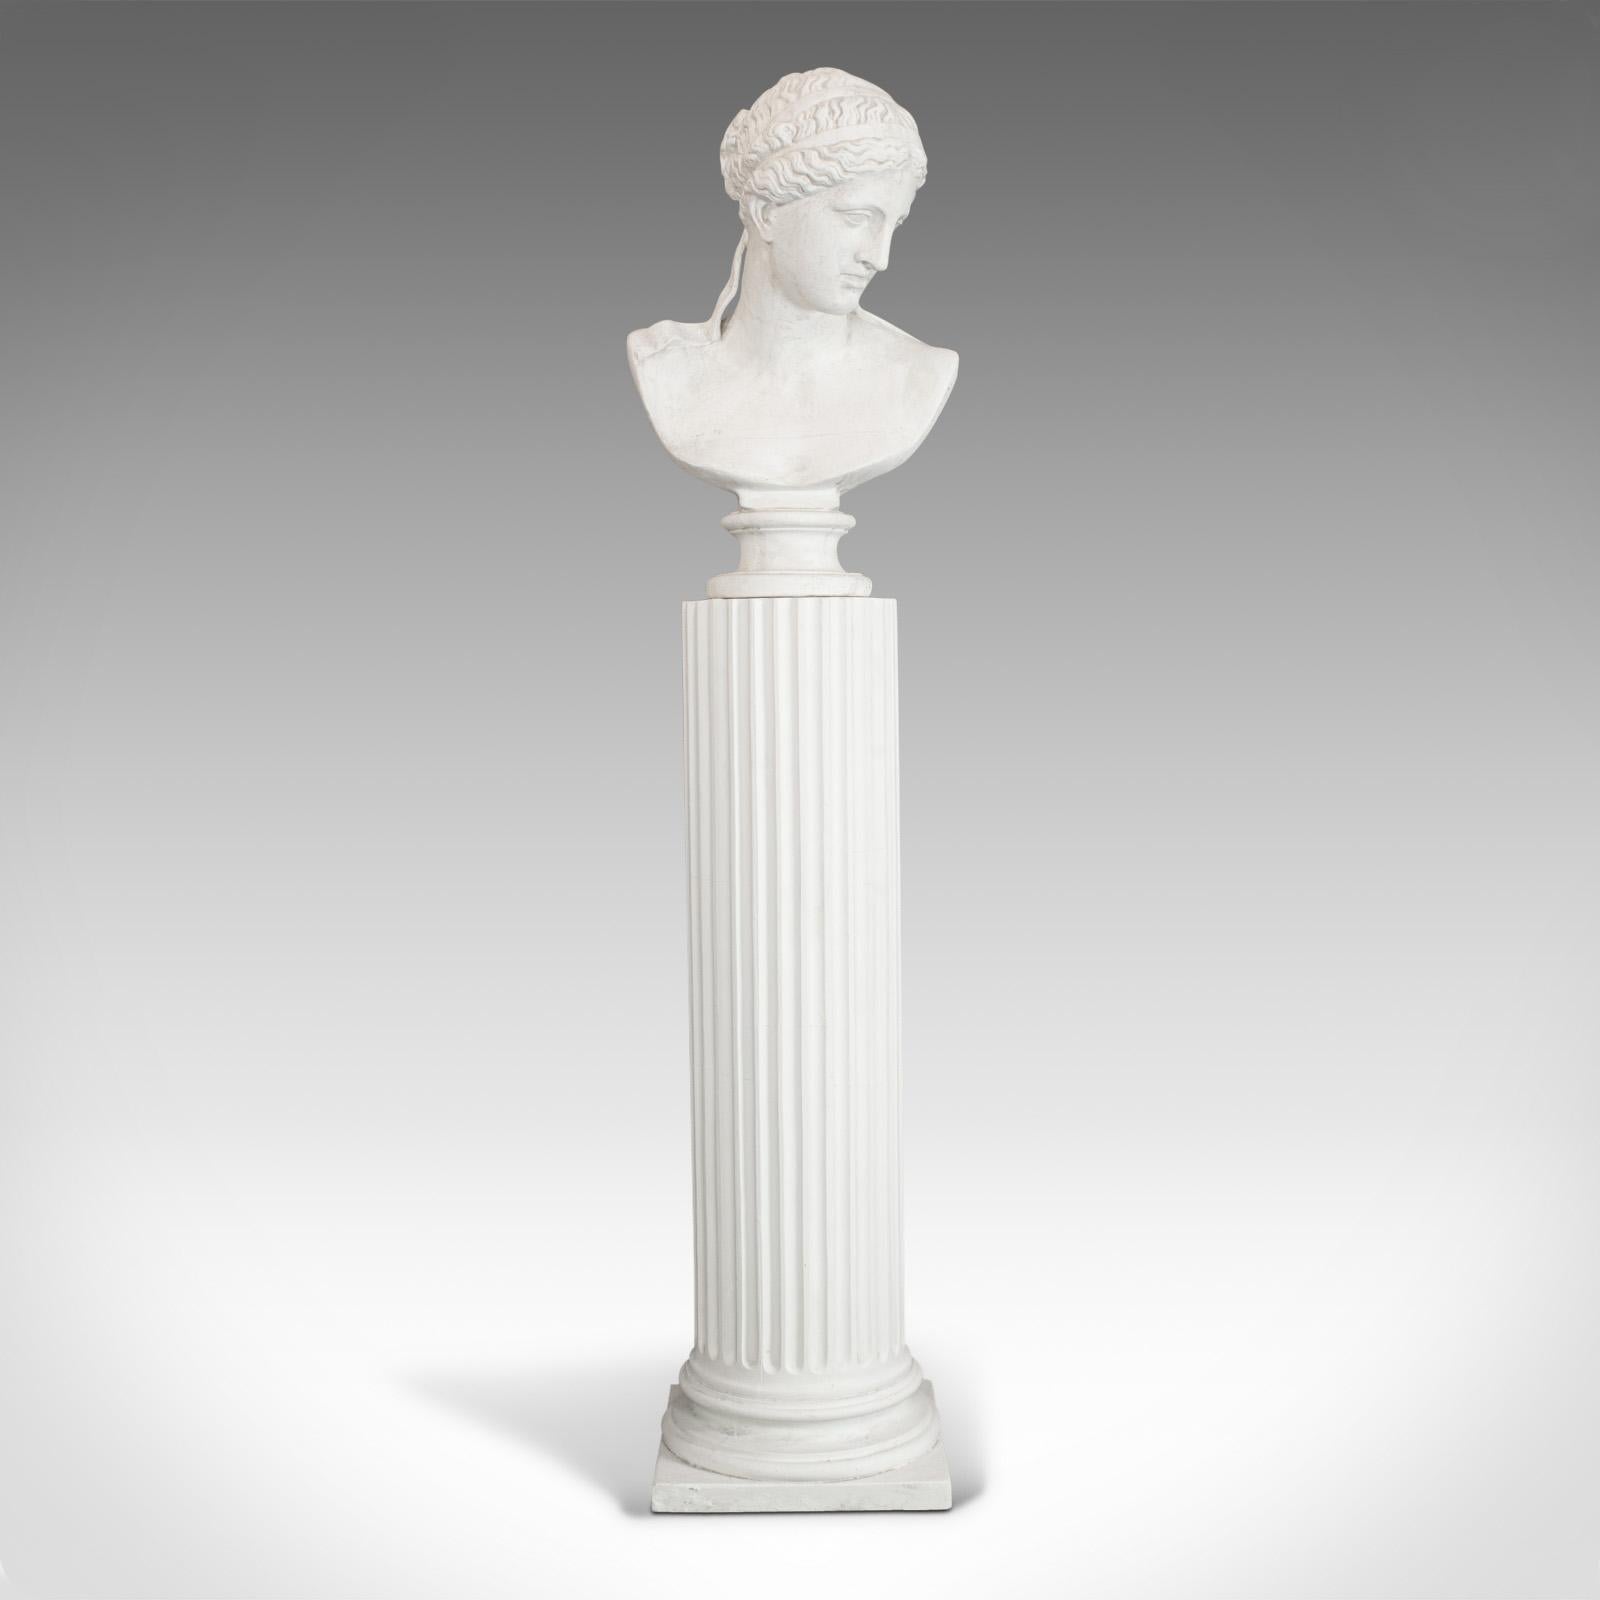 This is a vintage bust on pedestal. An English plaster cast female portrait atop a Doric column and dating to the late 20th century.

Classic Elegance and appealing form
Displays a desirable aged patina
Impressive proportion sure to enhance any